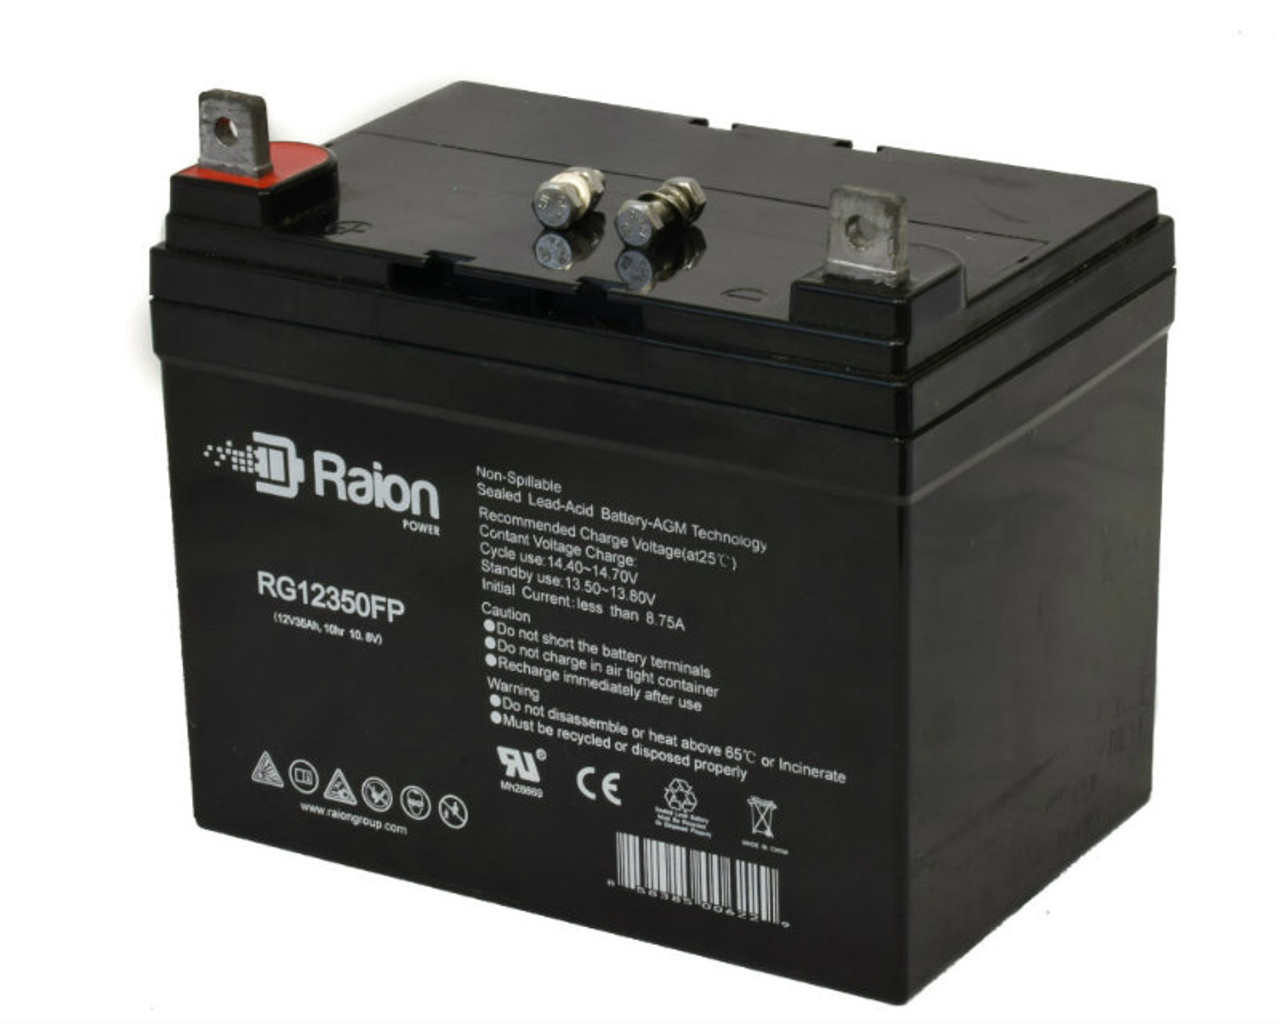 Raion Power Replacement 12V 35Ah RG12350FP Battery for Weiboer GB12-33